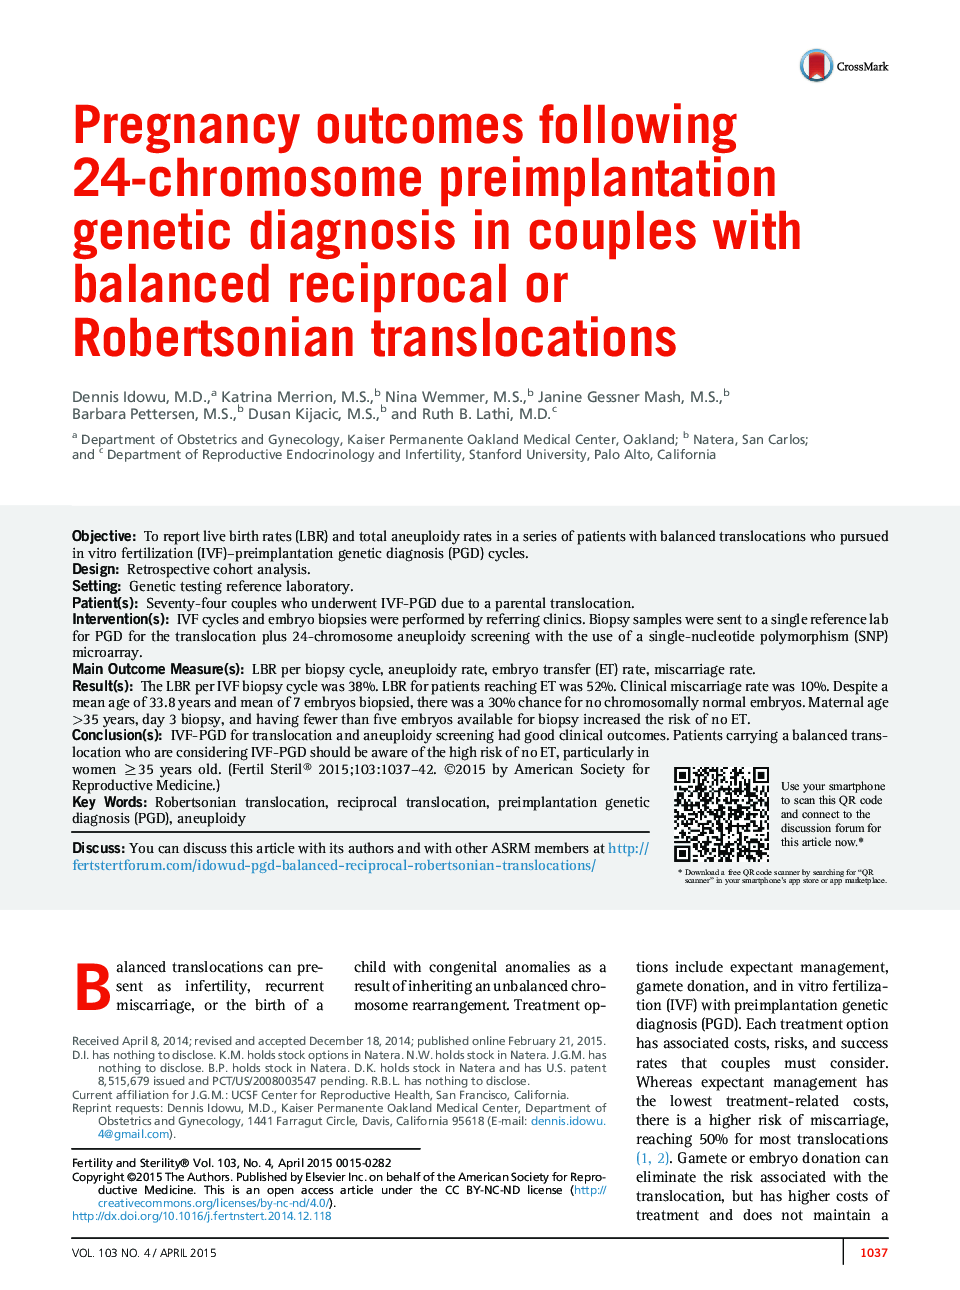 Pregnancy outcomes following 24-chromosome preimplantation genetic diagnosis in couples with balanced reciprocal or Robertsonian translocations